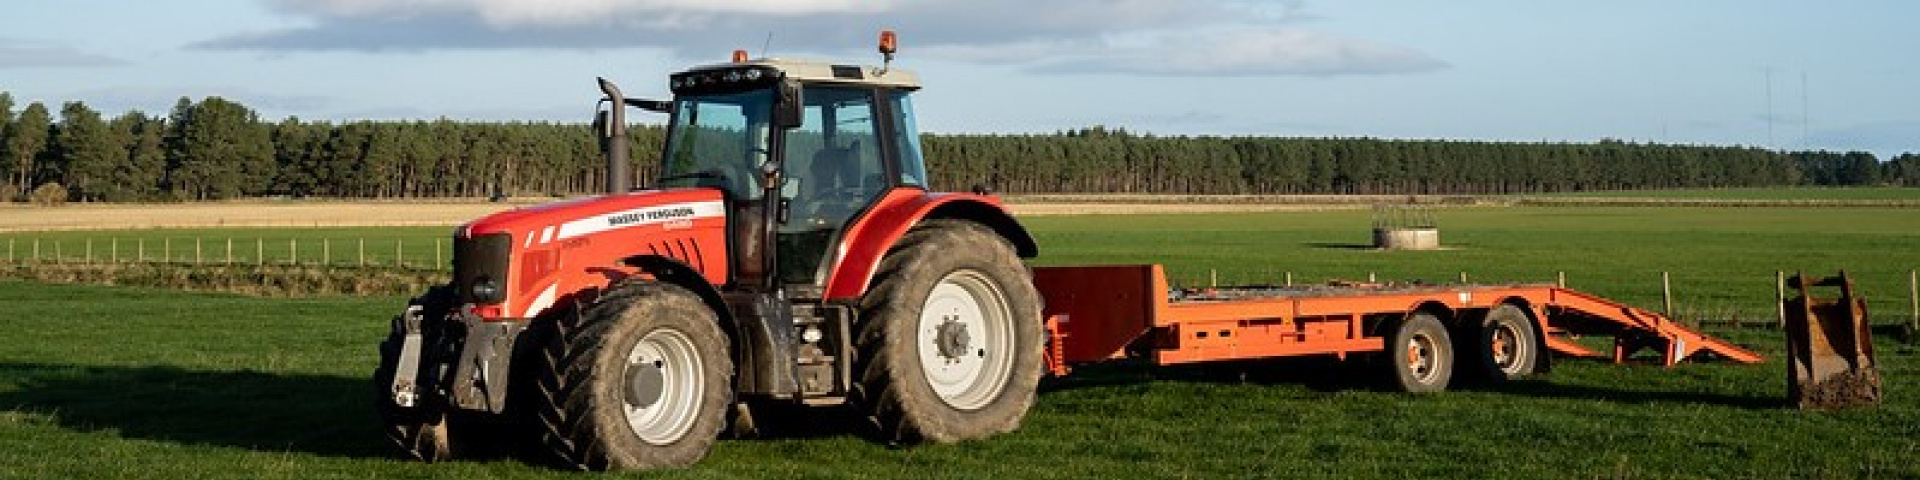 Red tractor on agricultural land in Scotland. Credit: Rural Matters.